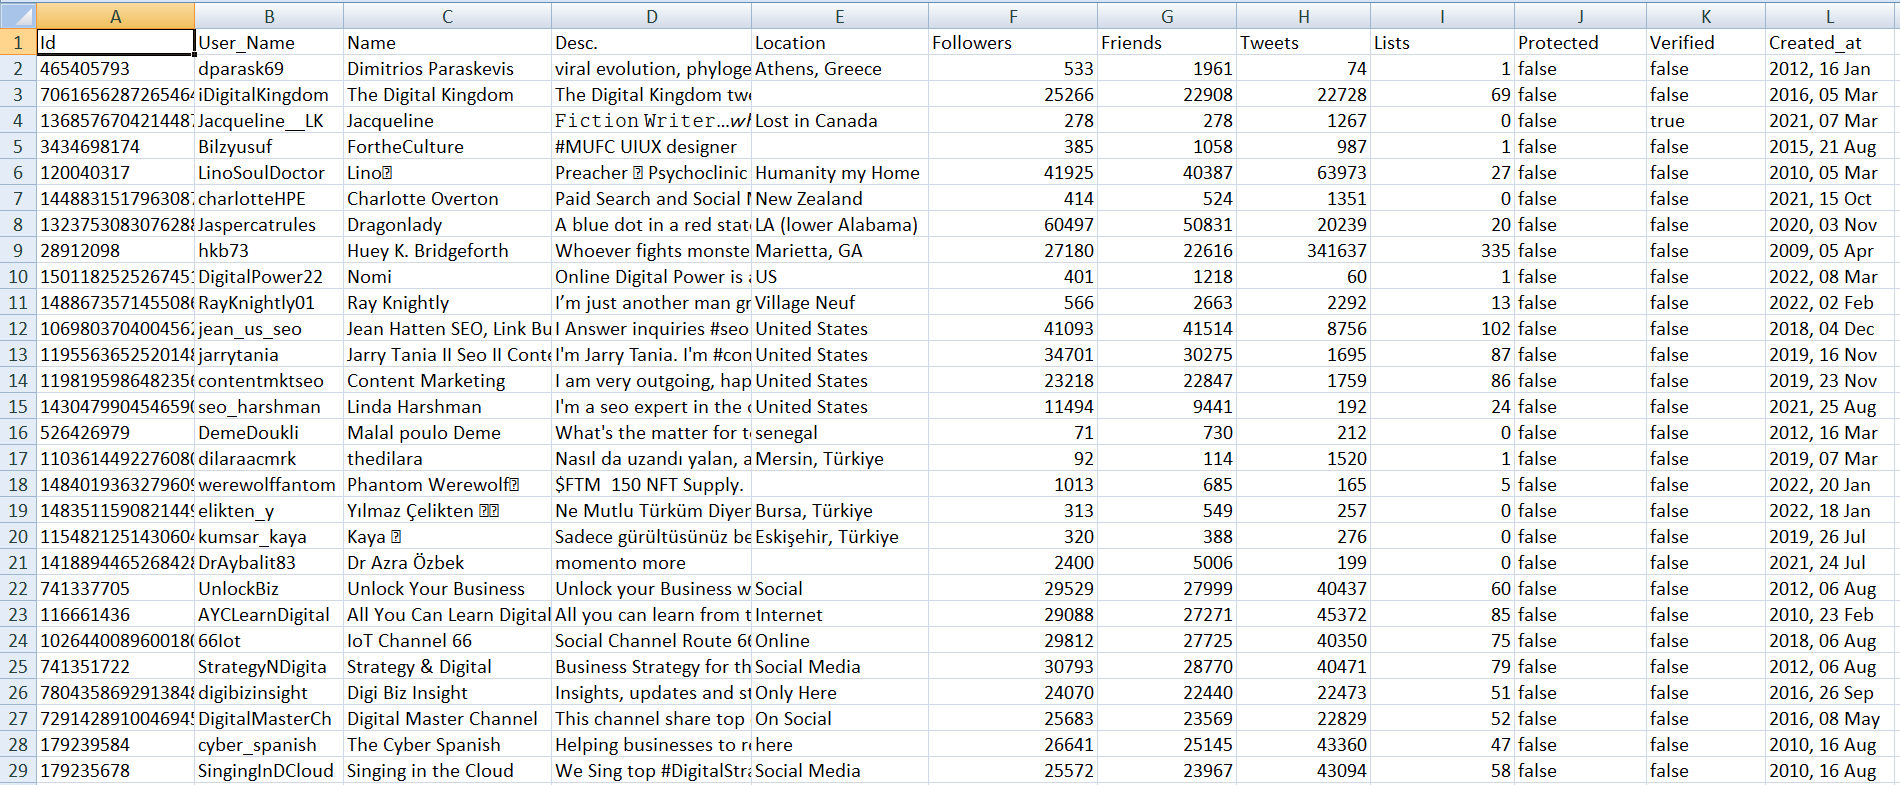 Twitter data in Excel and CSV